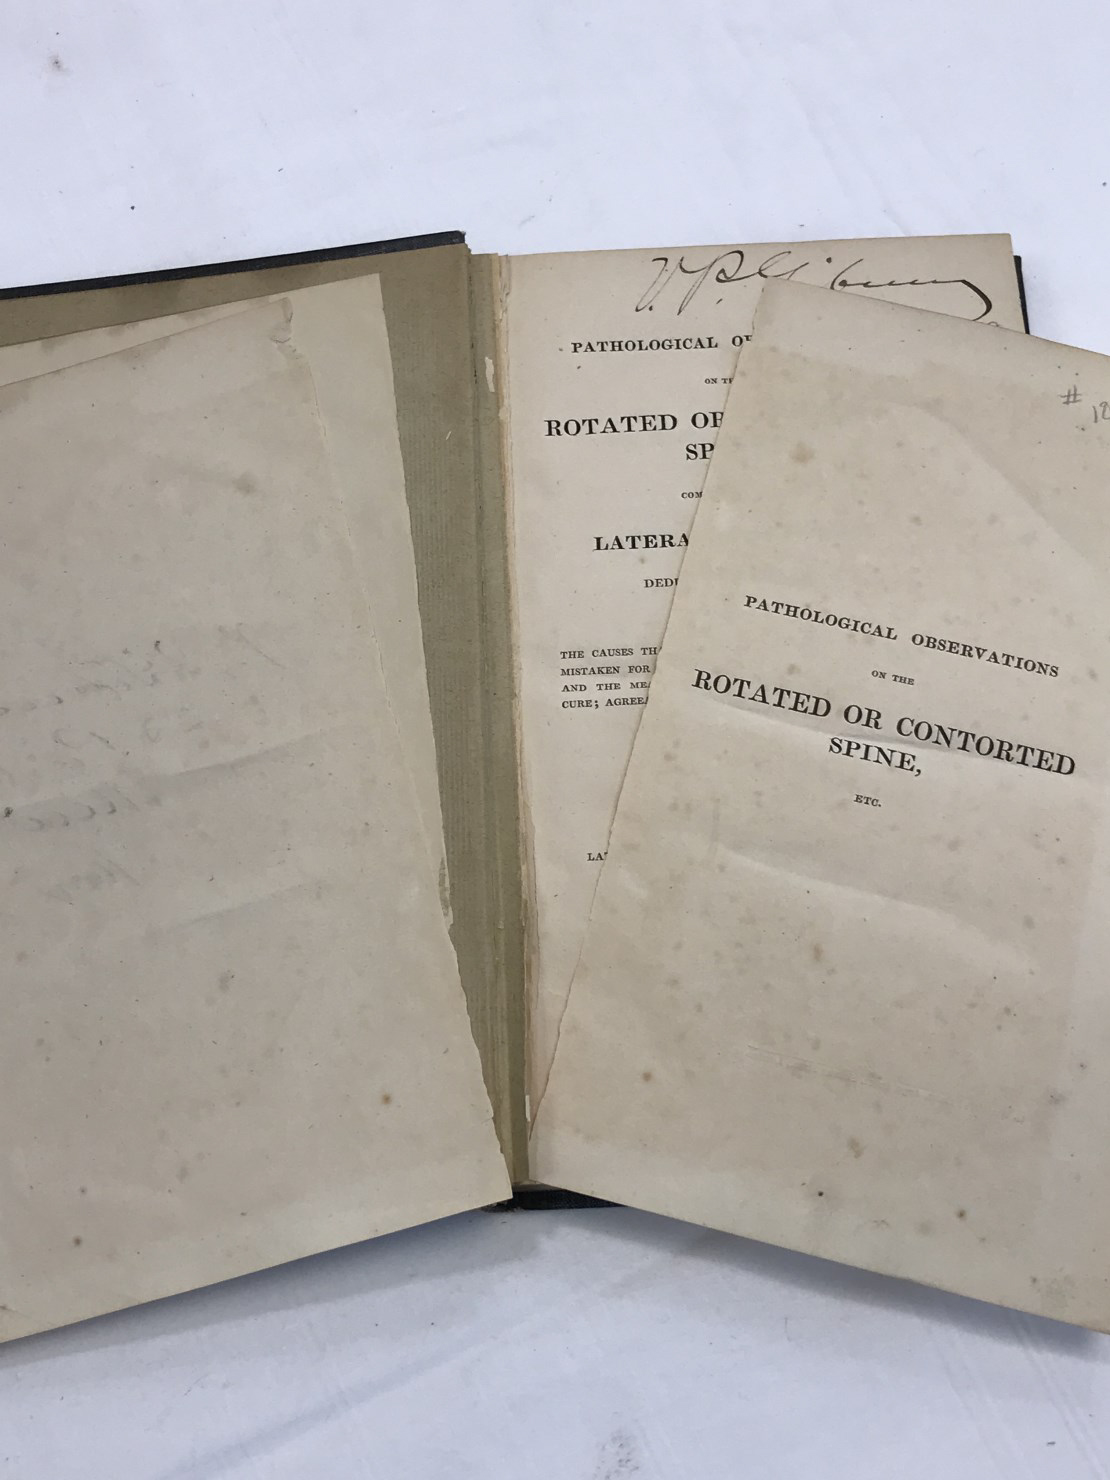 Repair needed to torn pages of Dods book